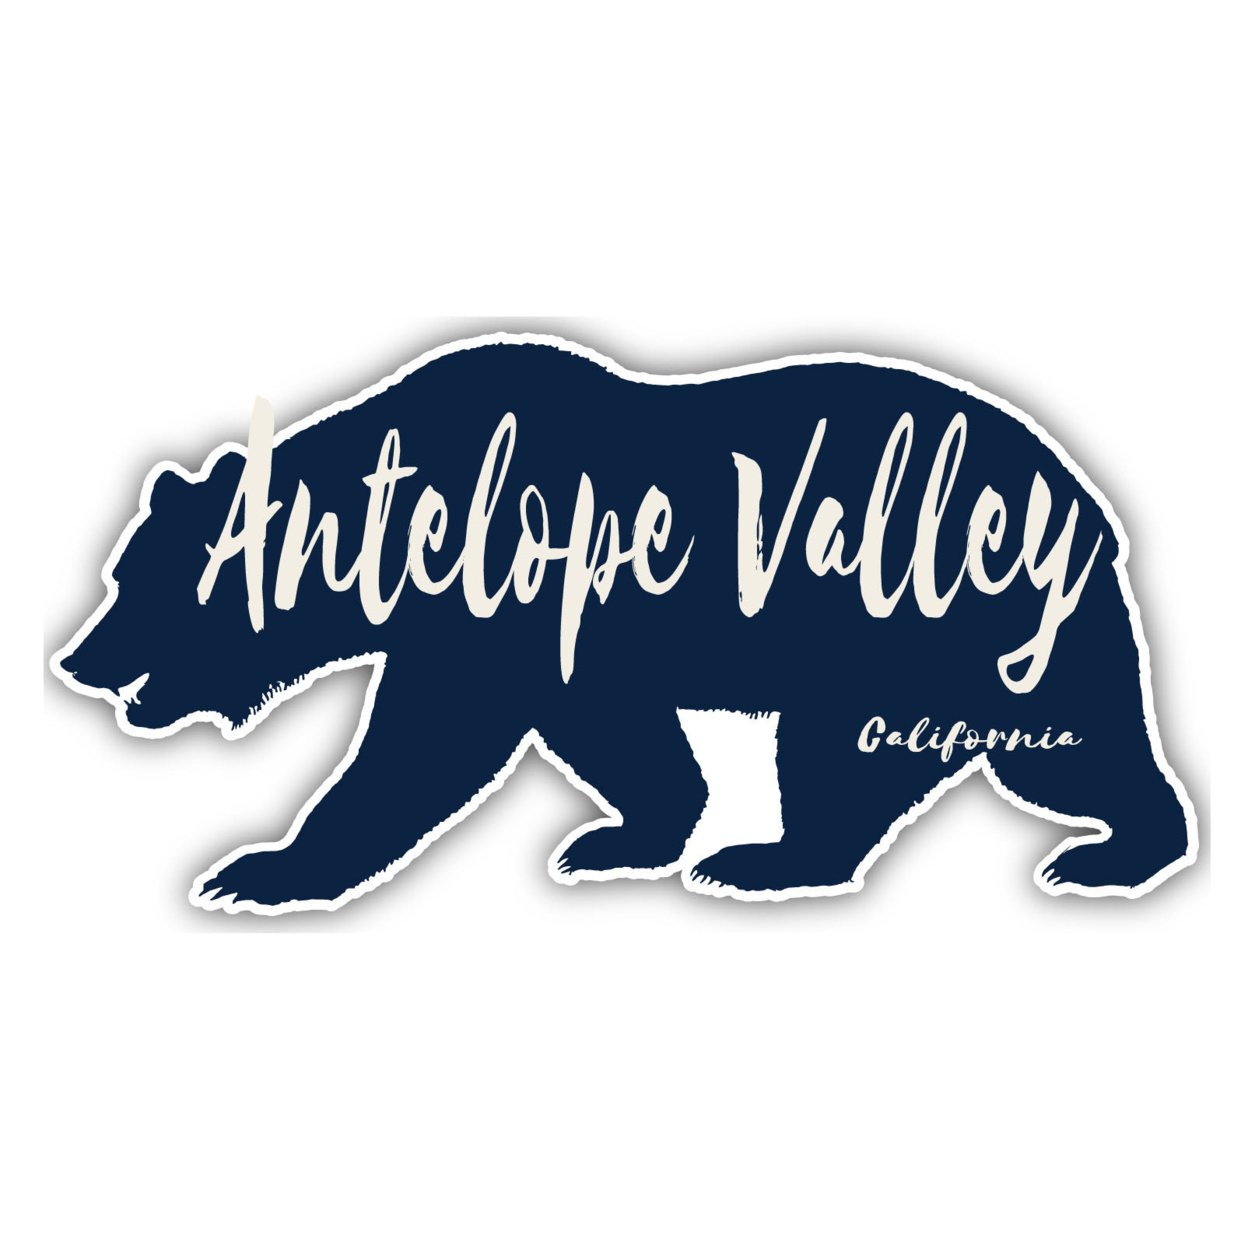 Antelope Valley California Souvenir Decorative Stickers (Choose Theme And Size) - Single Unit, 2-Inch, Tent